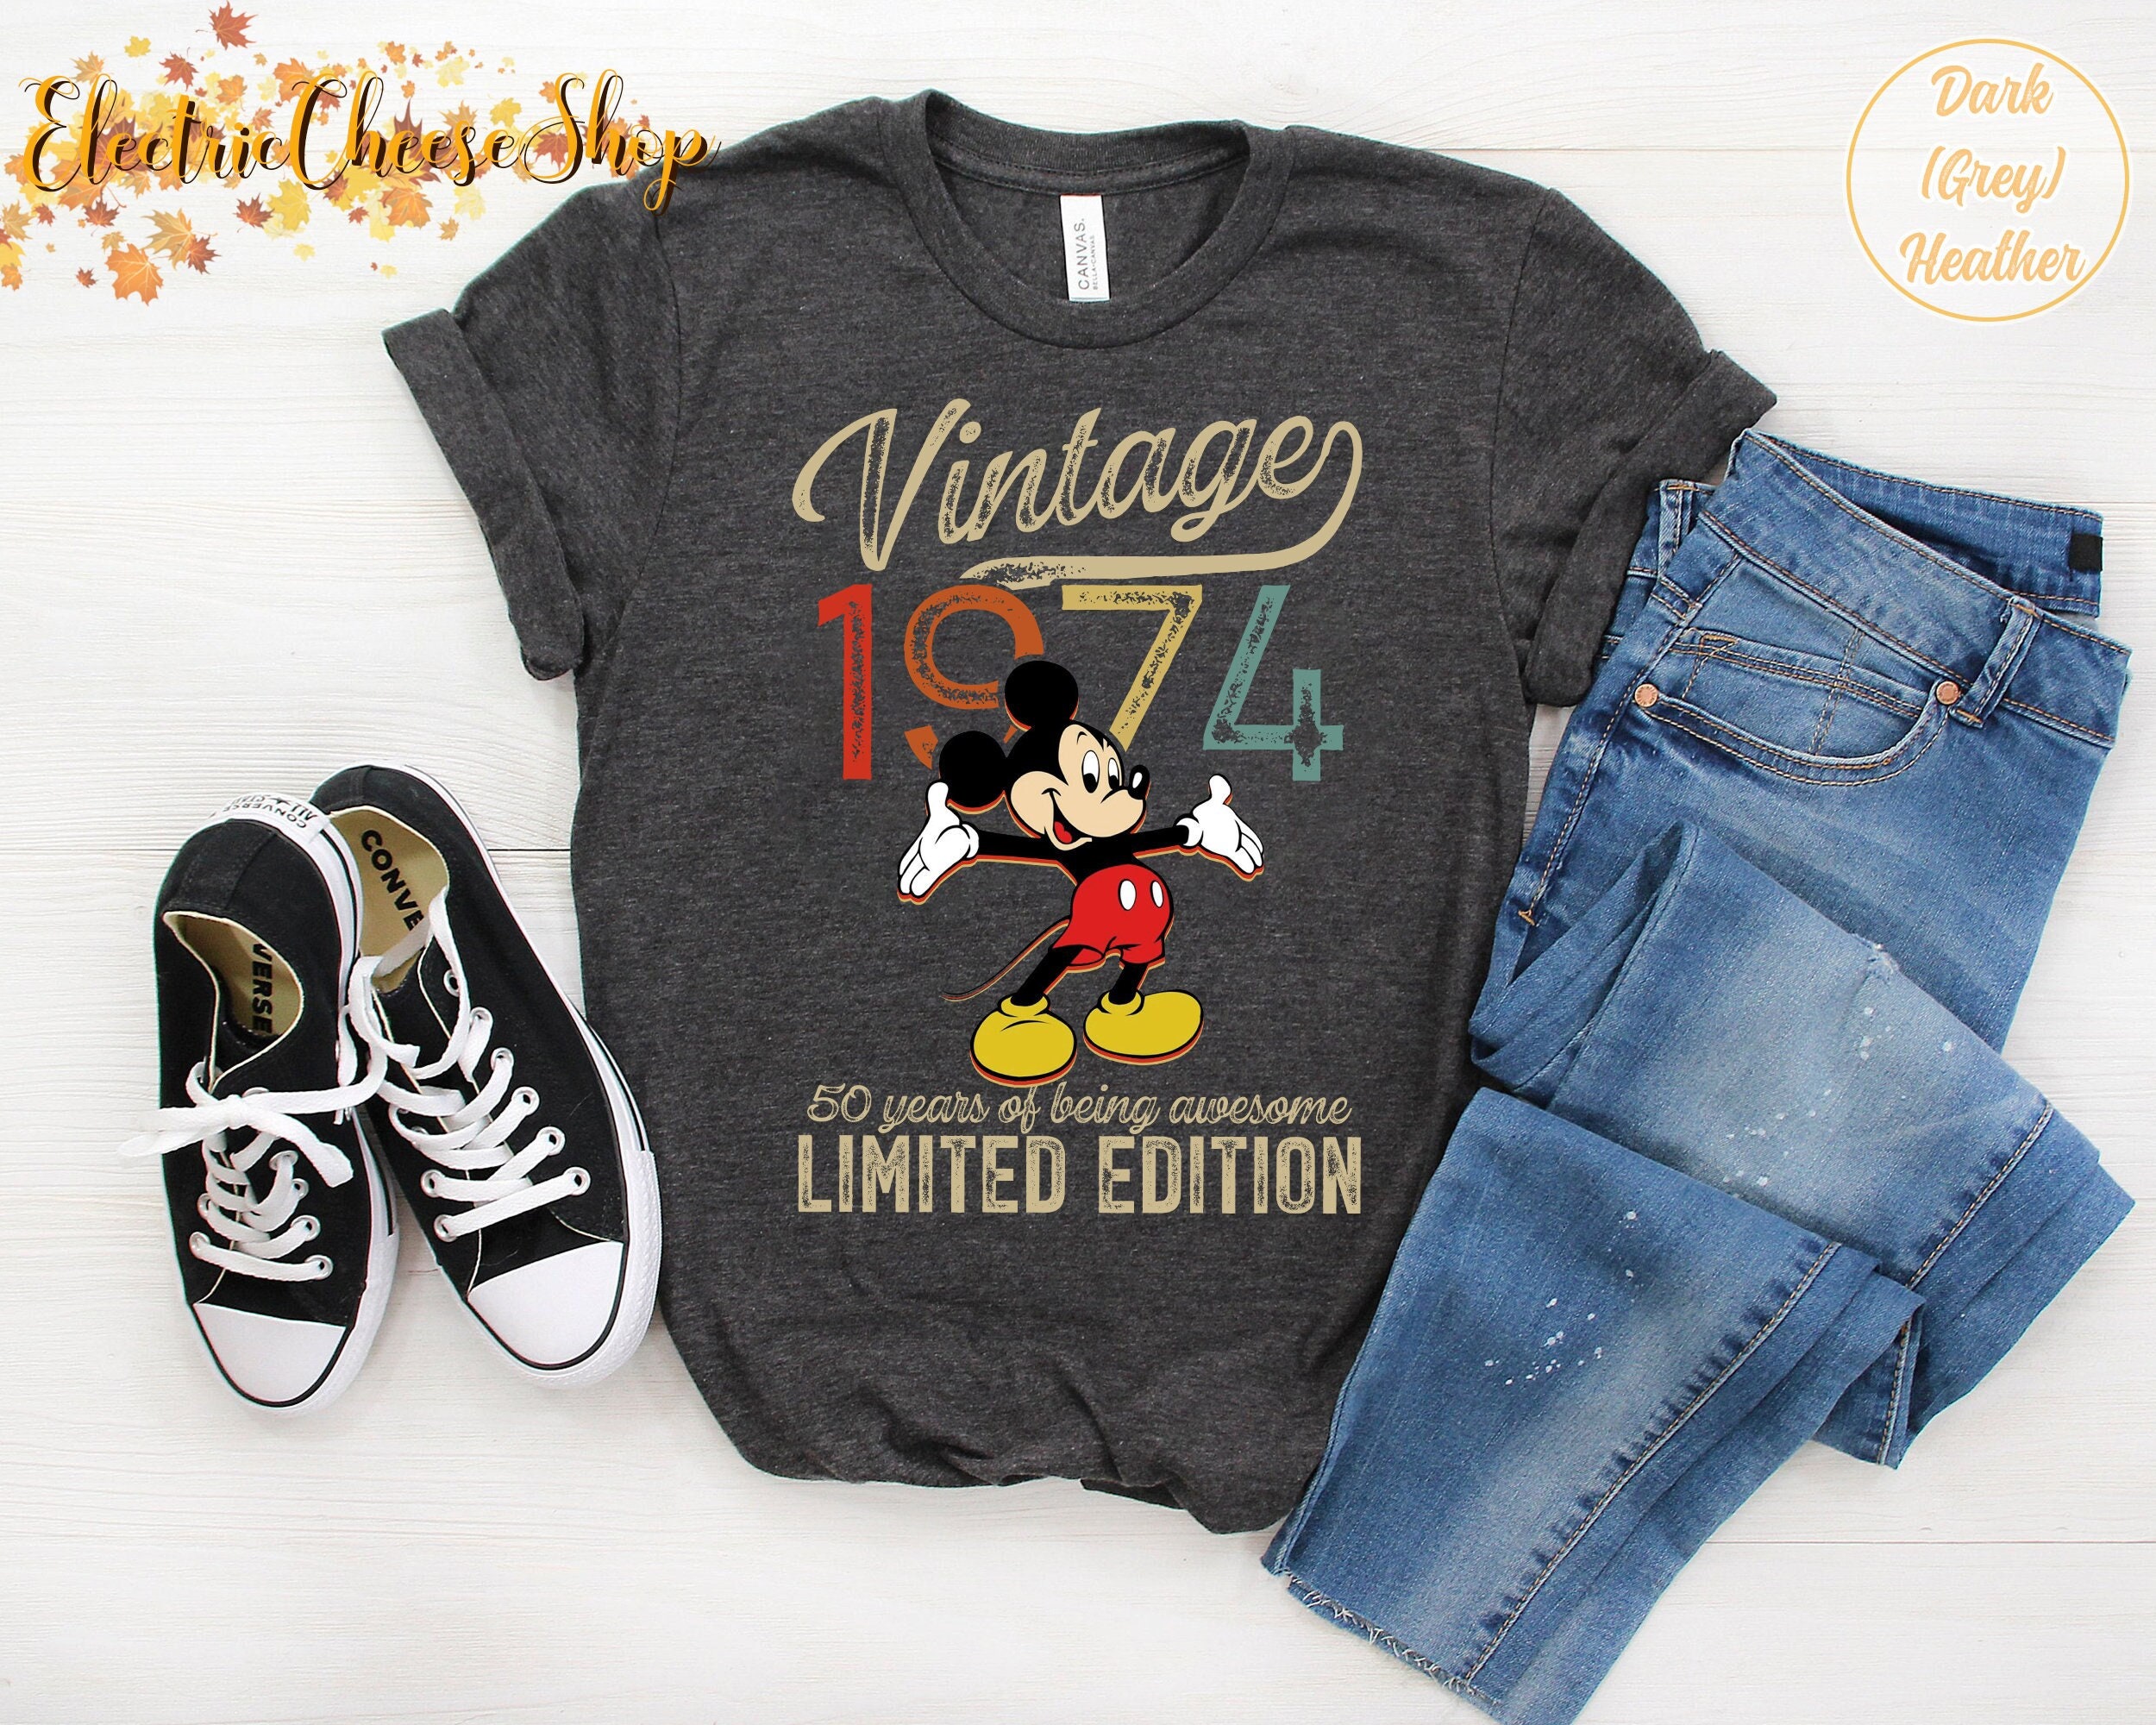 Etsy 60% Mickey Vintage - Up to Mouse Shirt Off -